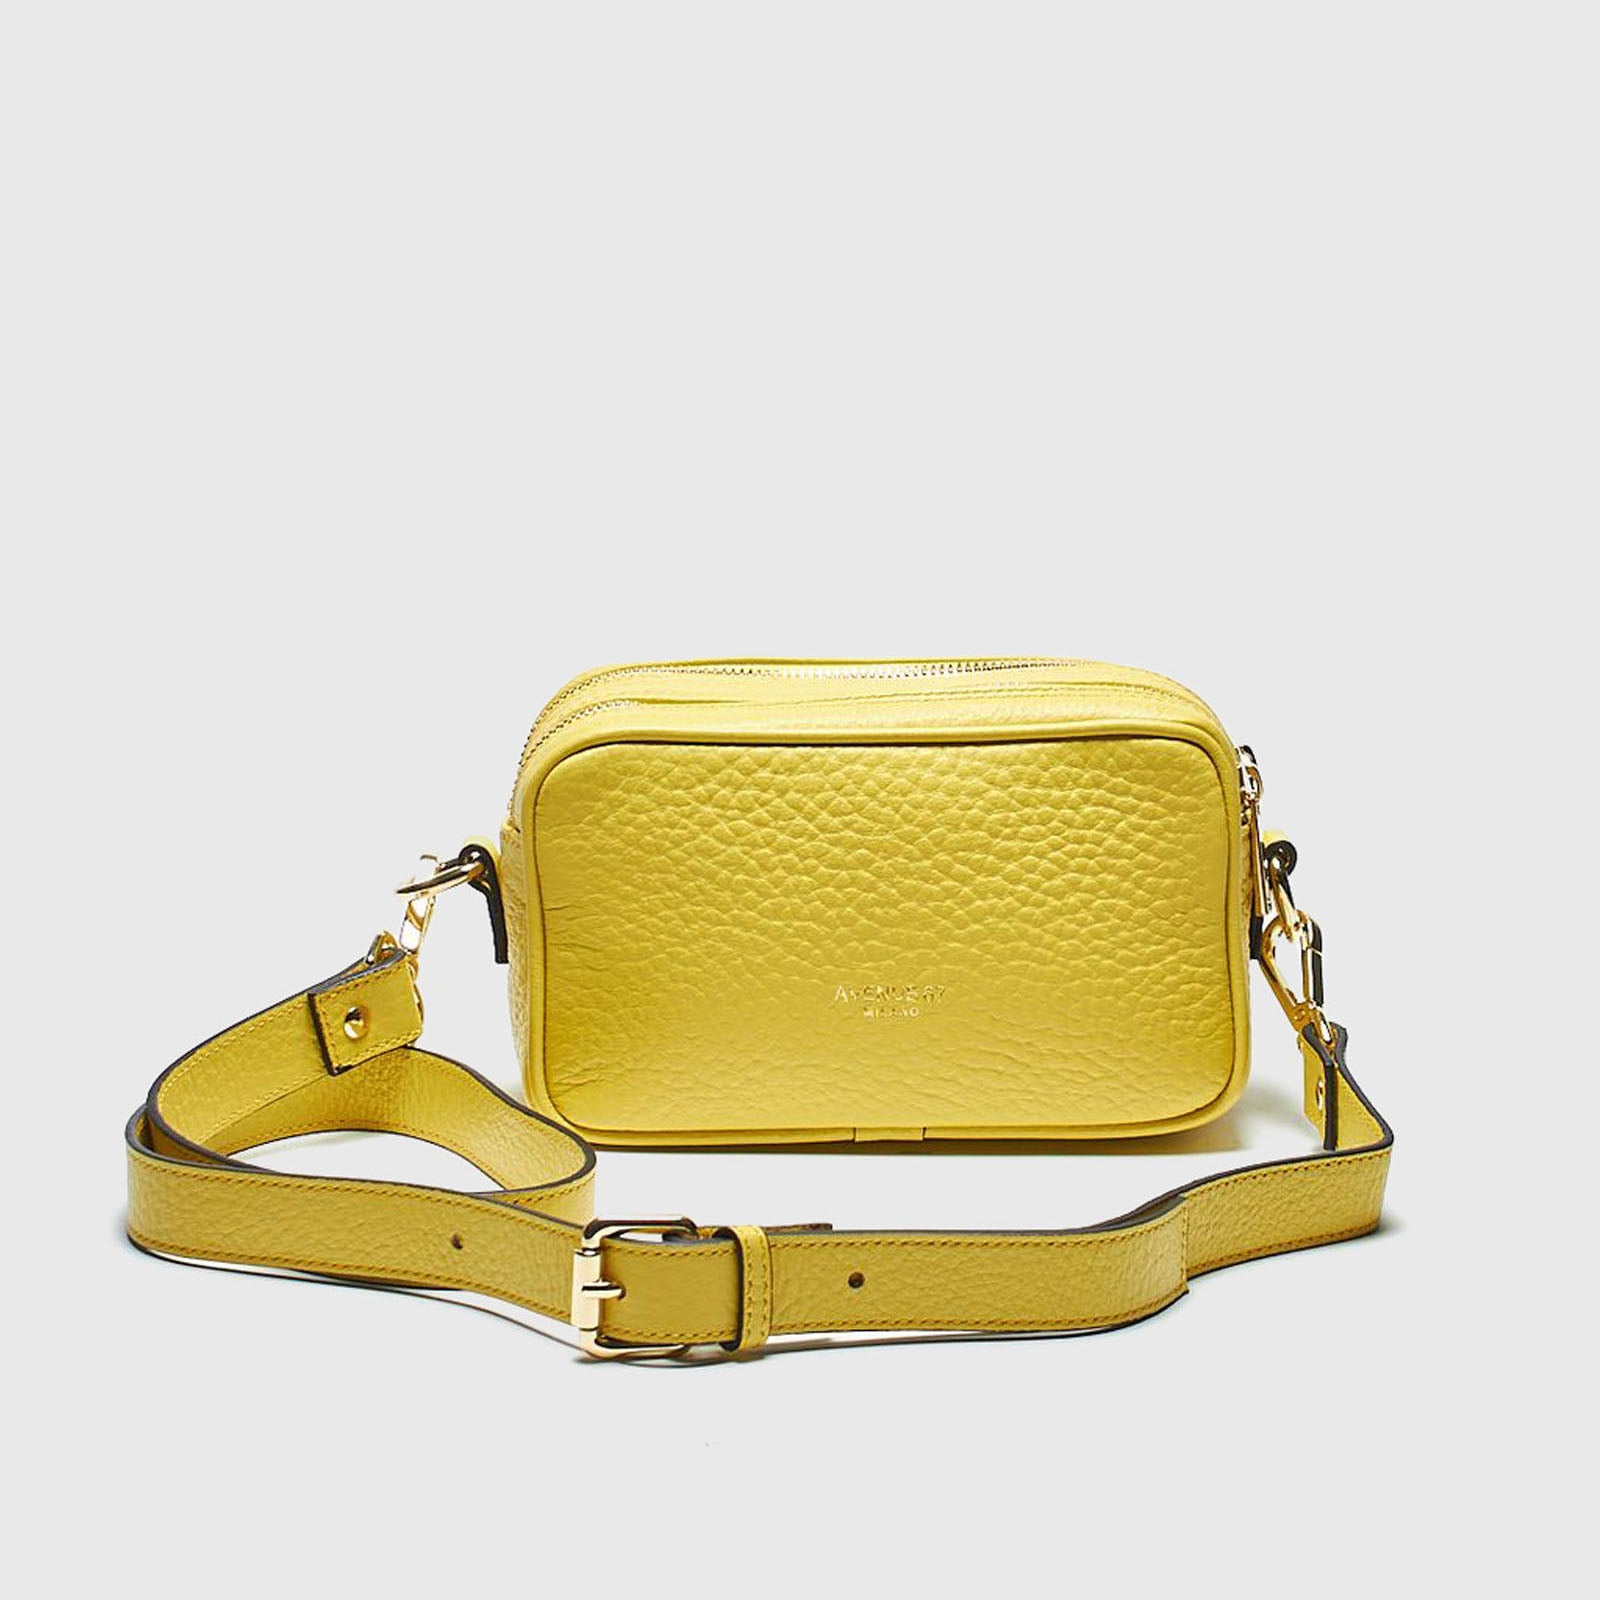 Avenue 67 Gabrielle Leather Bag Yellow - 6